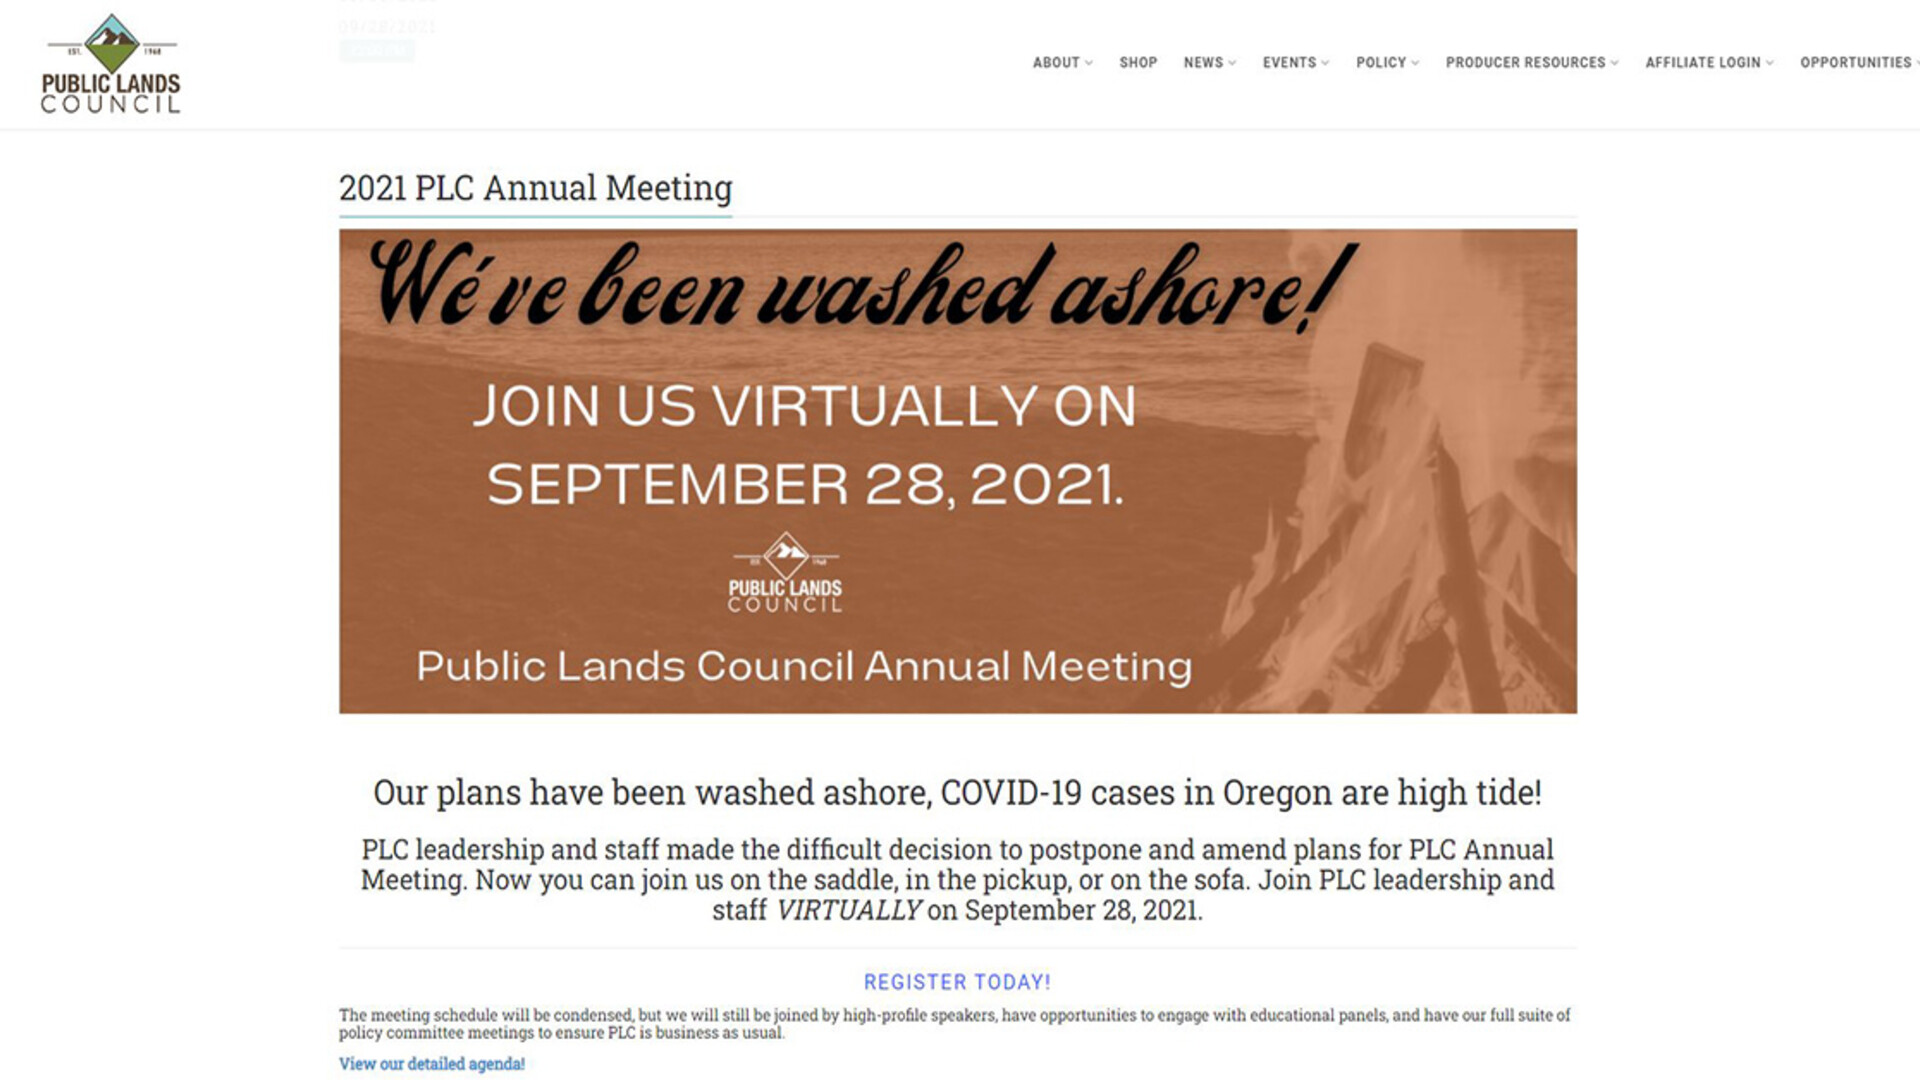 Public Lands Council to Meet Virtually September 28 for Annual Meeting